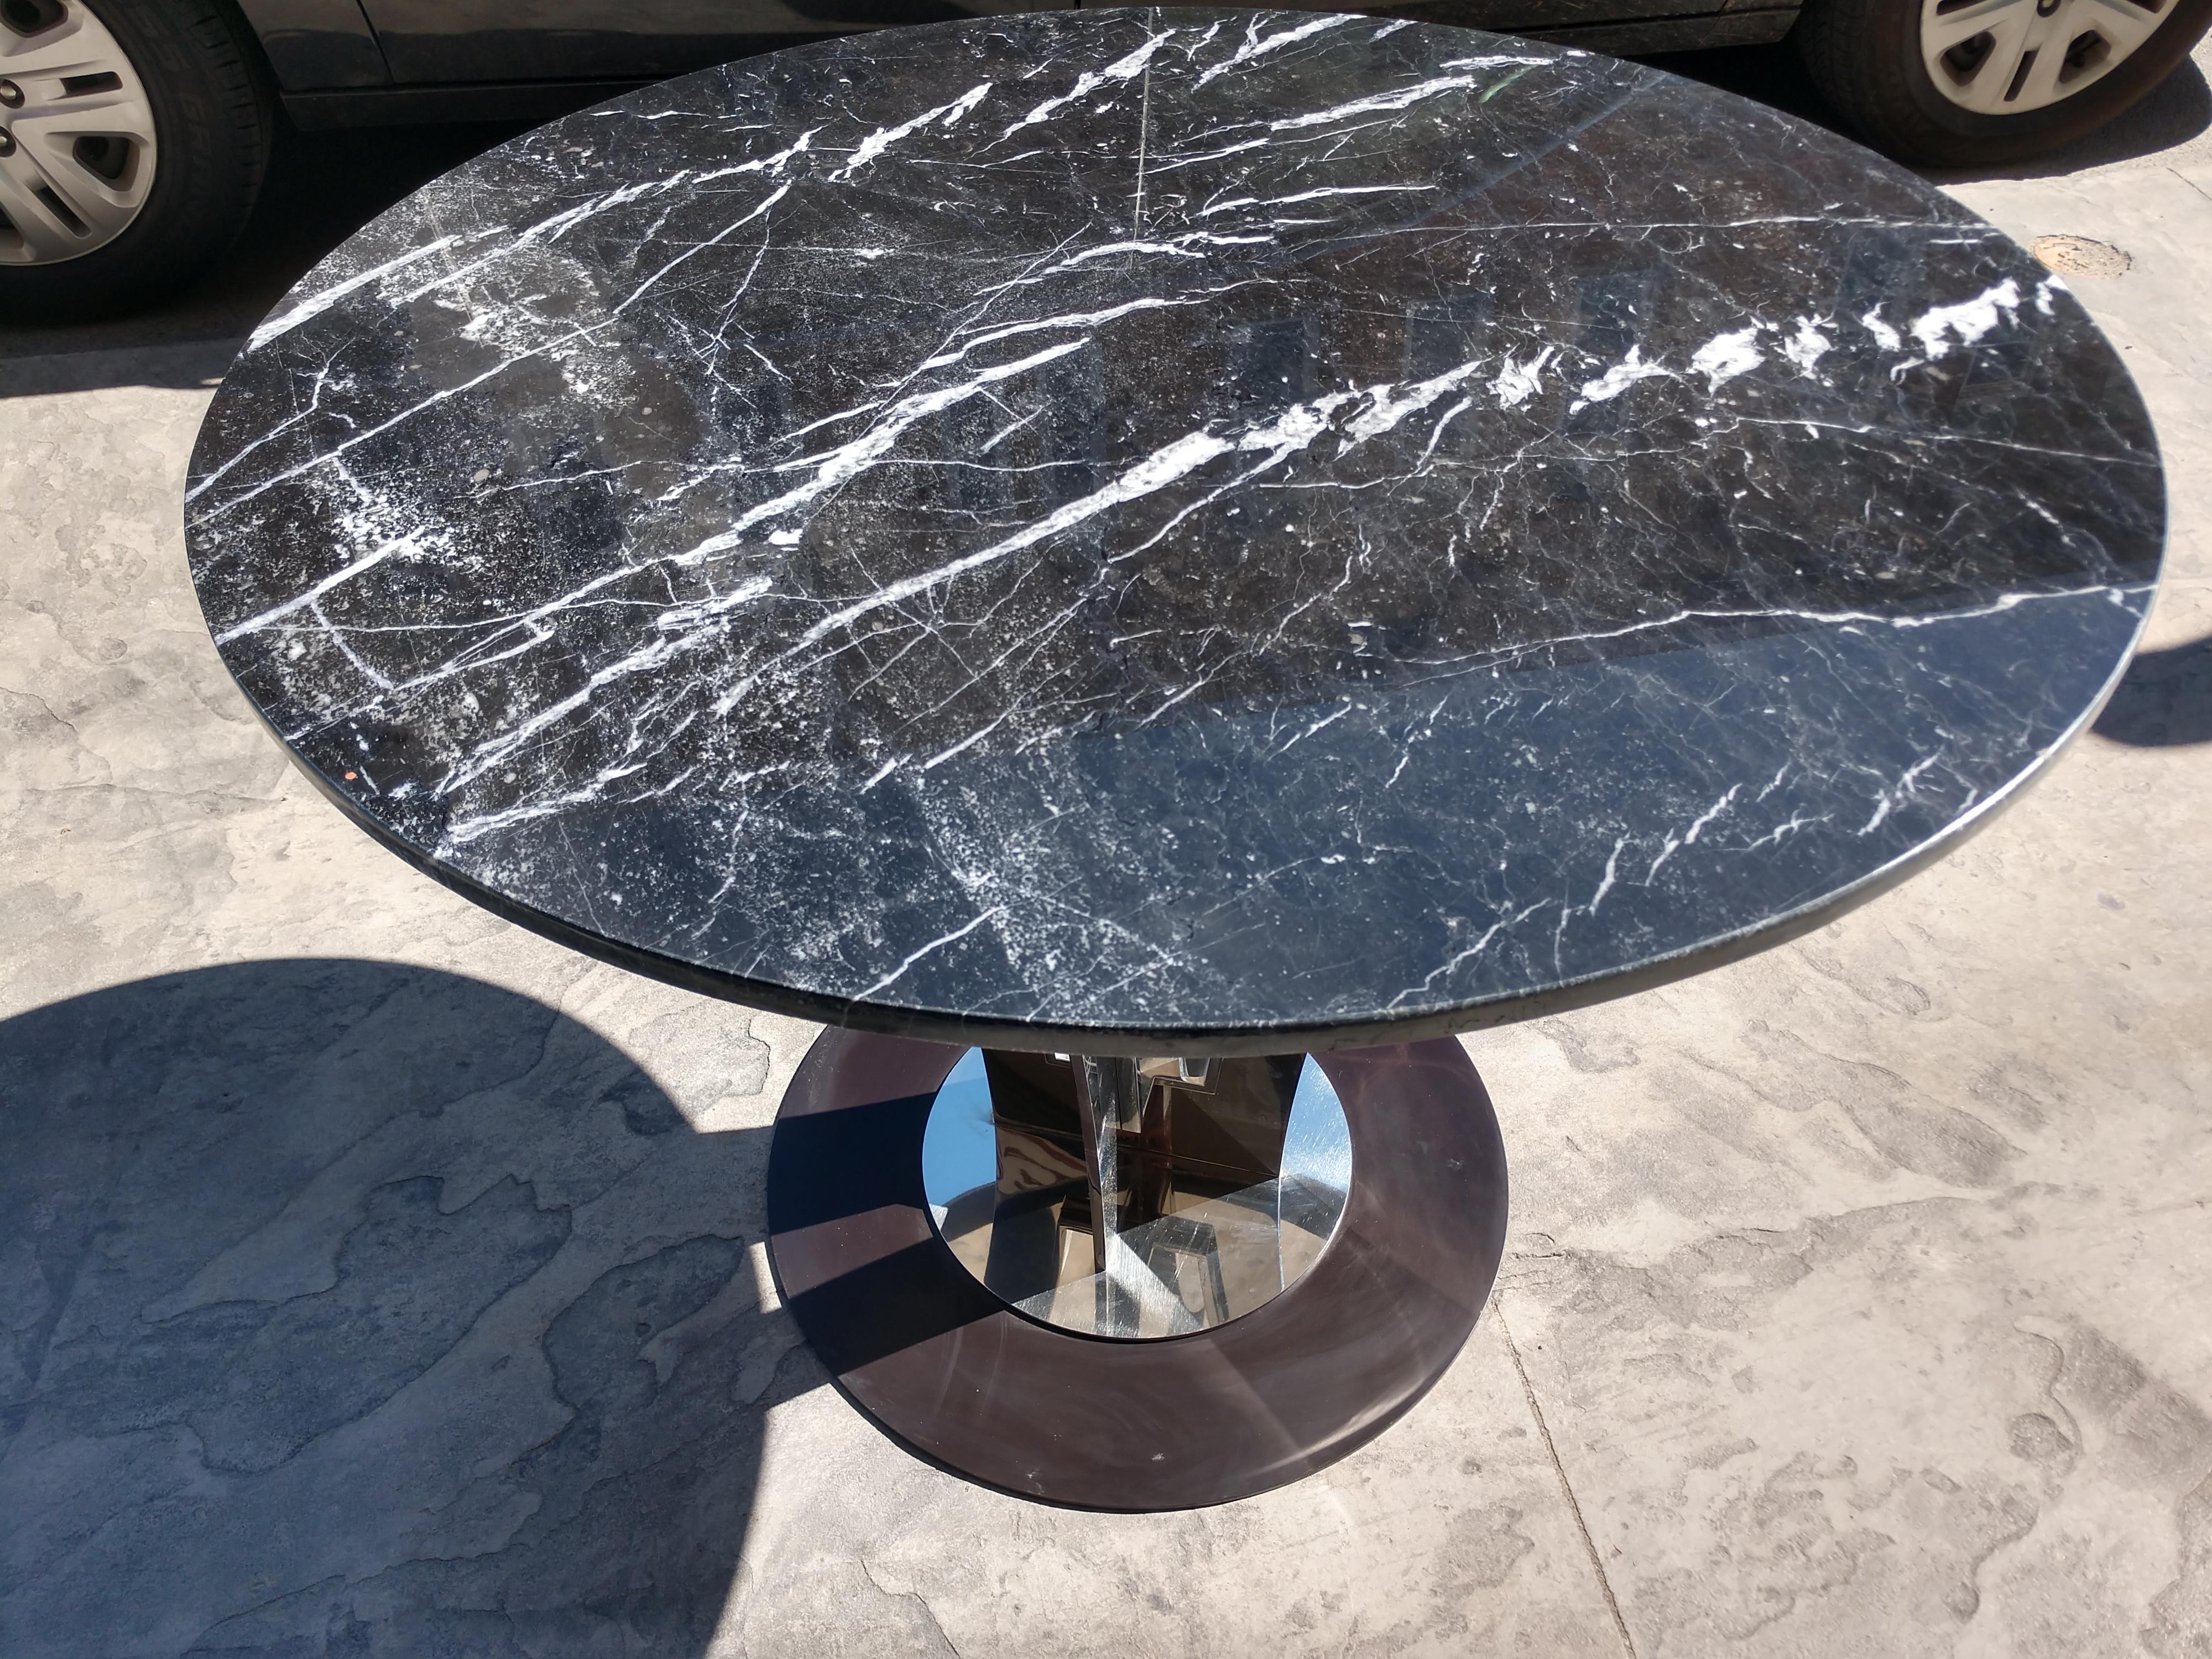 Fabulous table from his Manhattan flagship store. Table was upgraded with a great piece of black marble with stunning white veins running throughout. In excellent vintage condition with minimal wear.